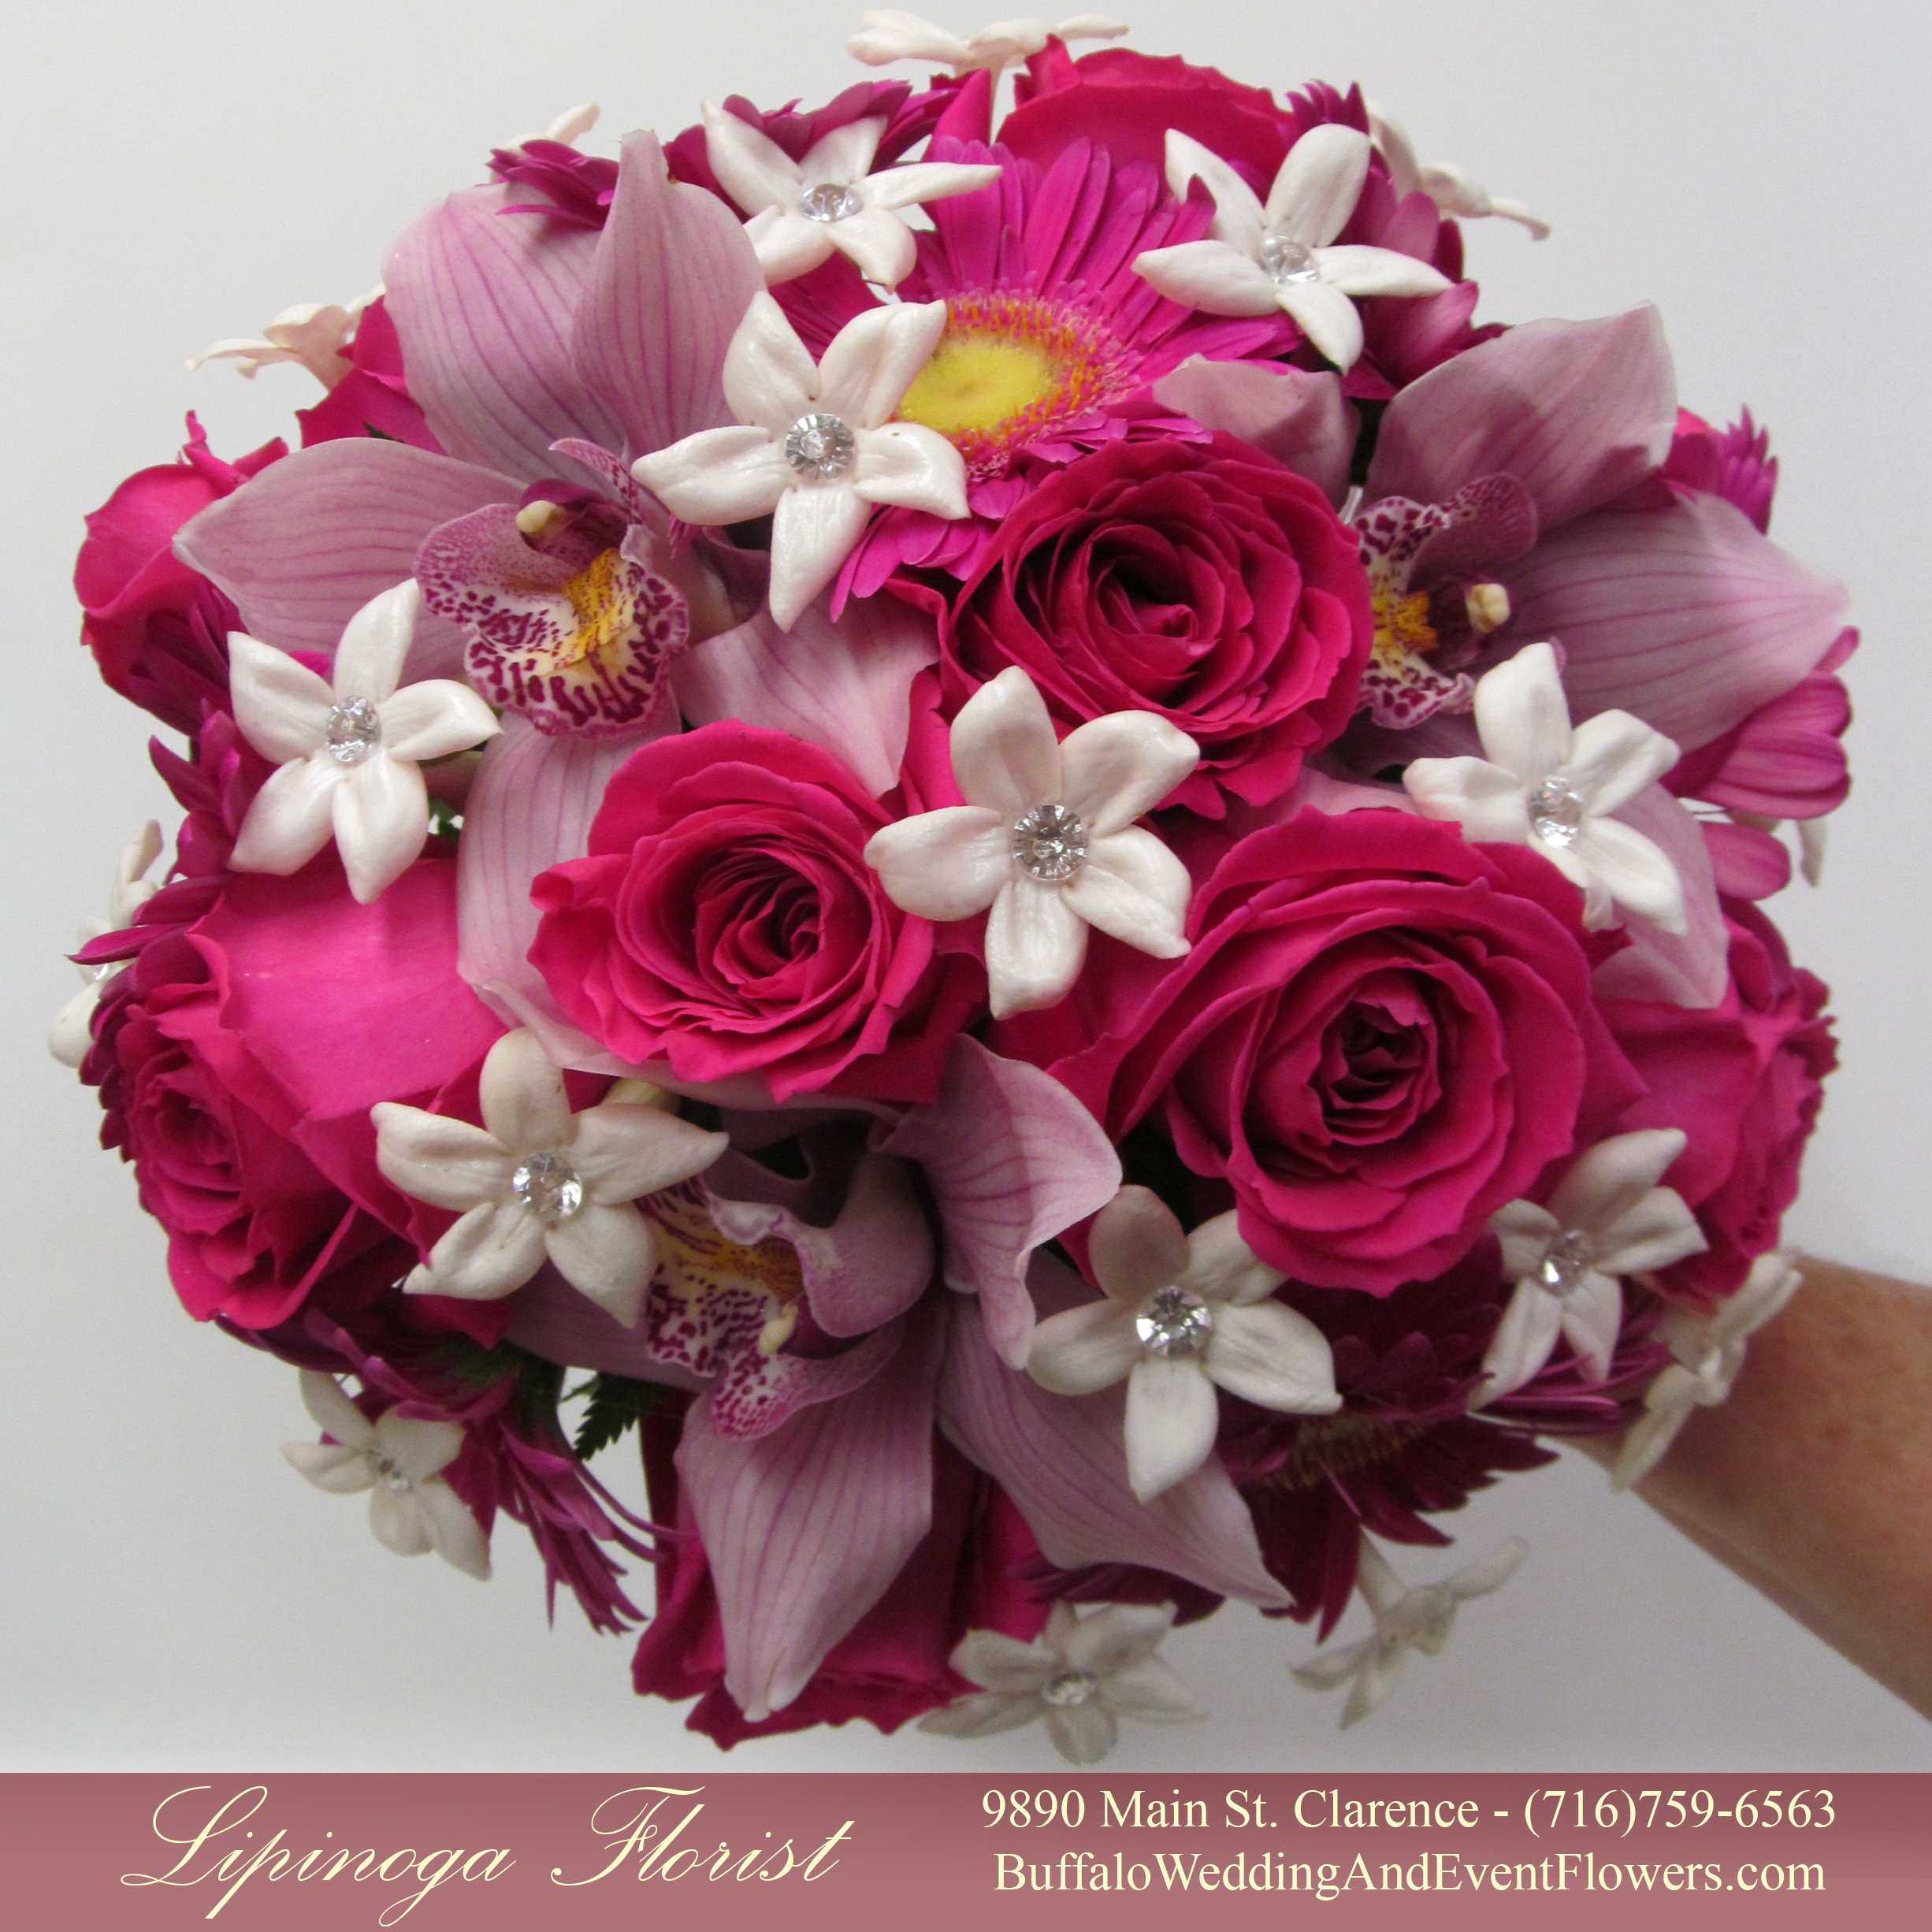 Wedding Flowers Buffalo Ny
 Hot Pink Wedding Flowers at Brierwood Country Club in